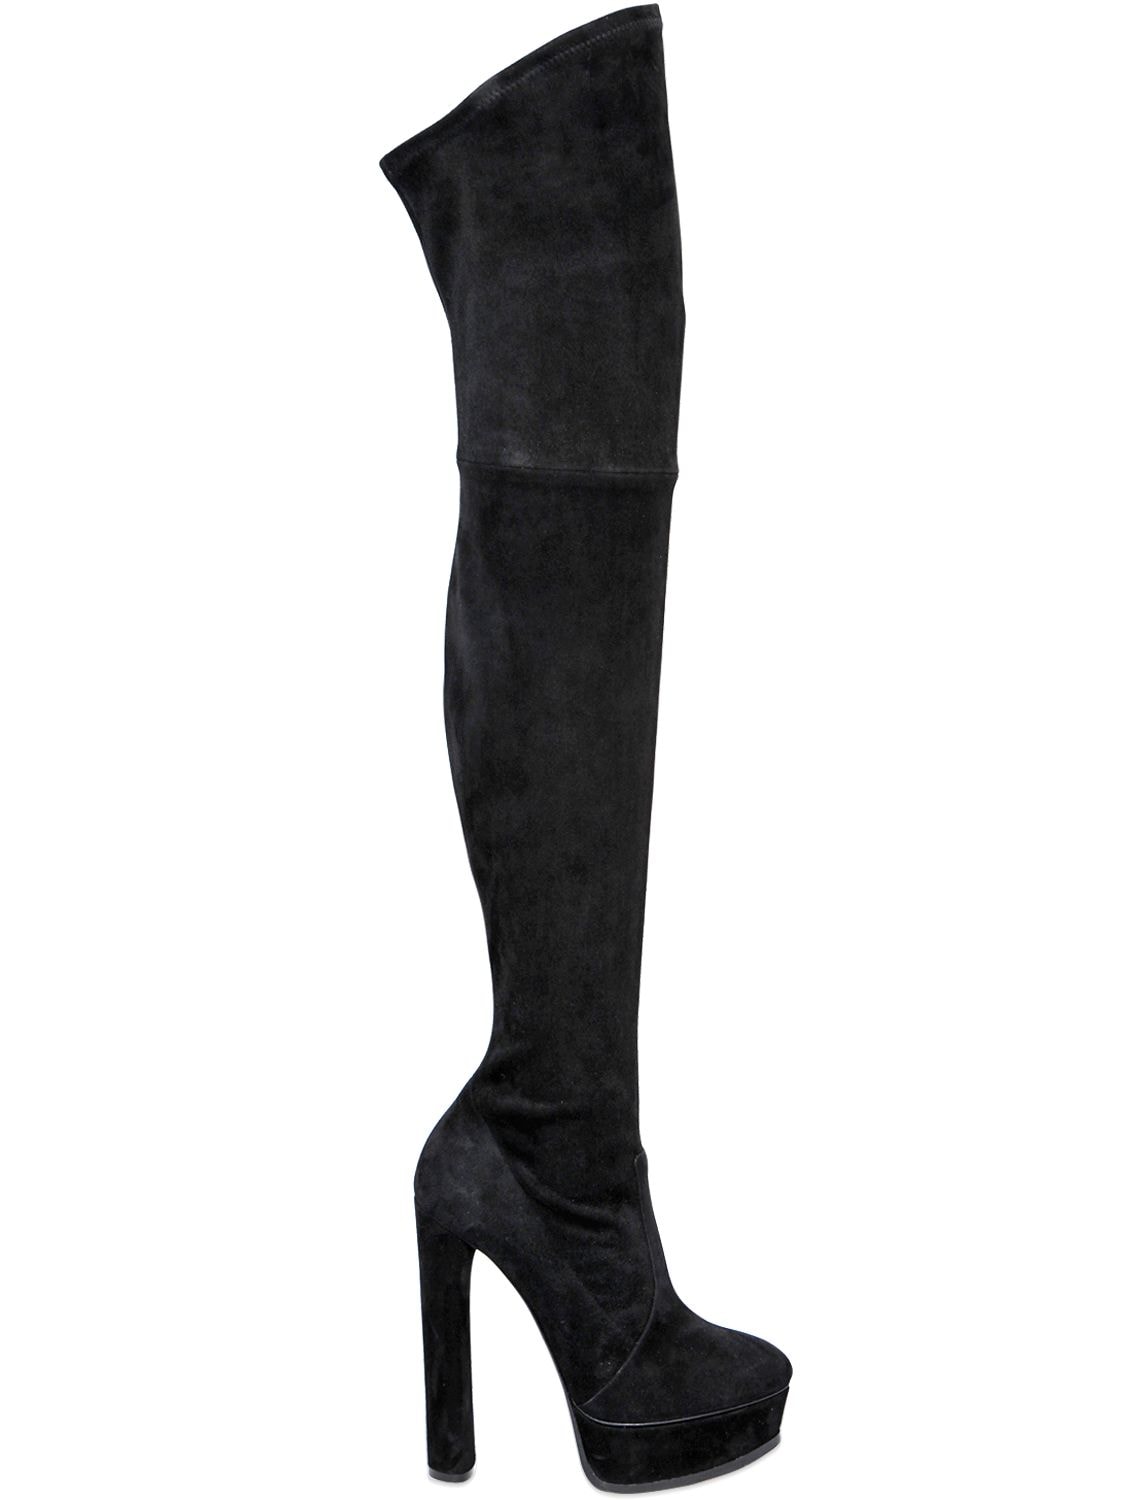 CASADEI 140MM STRETCH SUEDE OVER THE KNEE BOOTS,66IAIM001-MDAw0